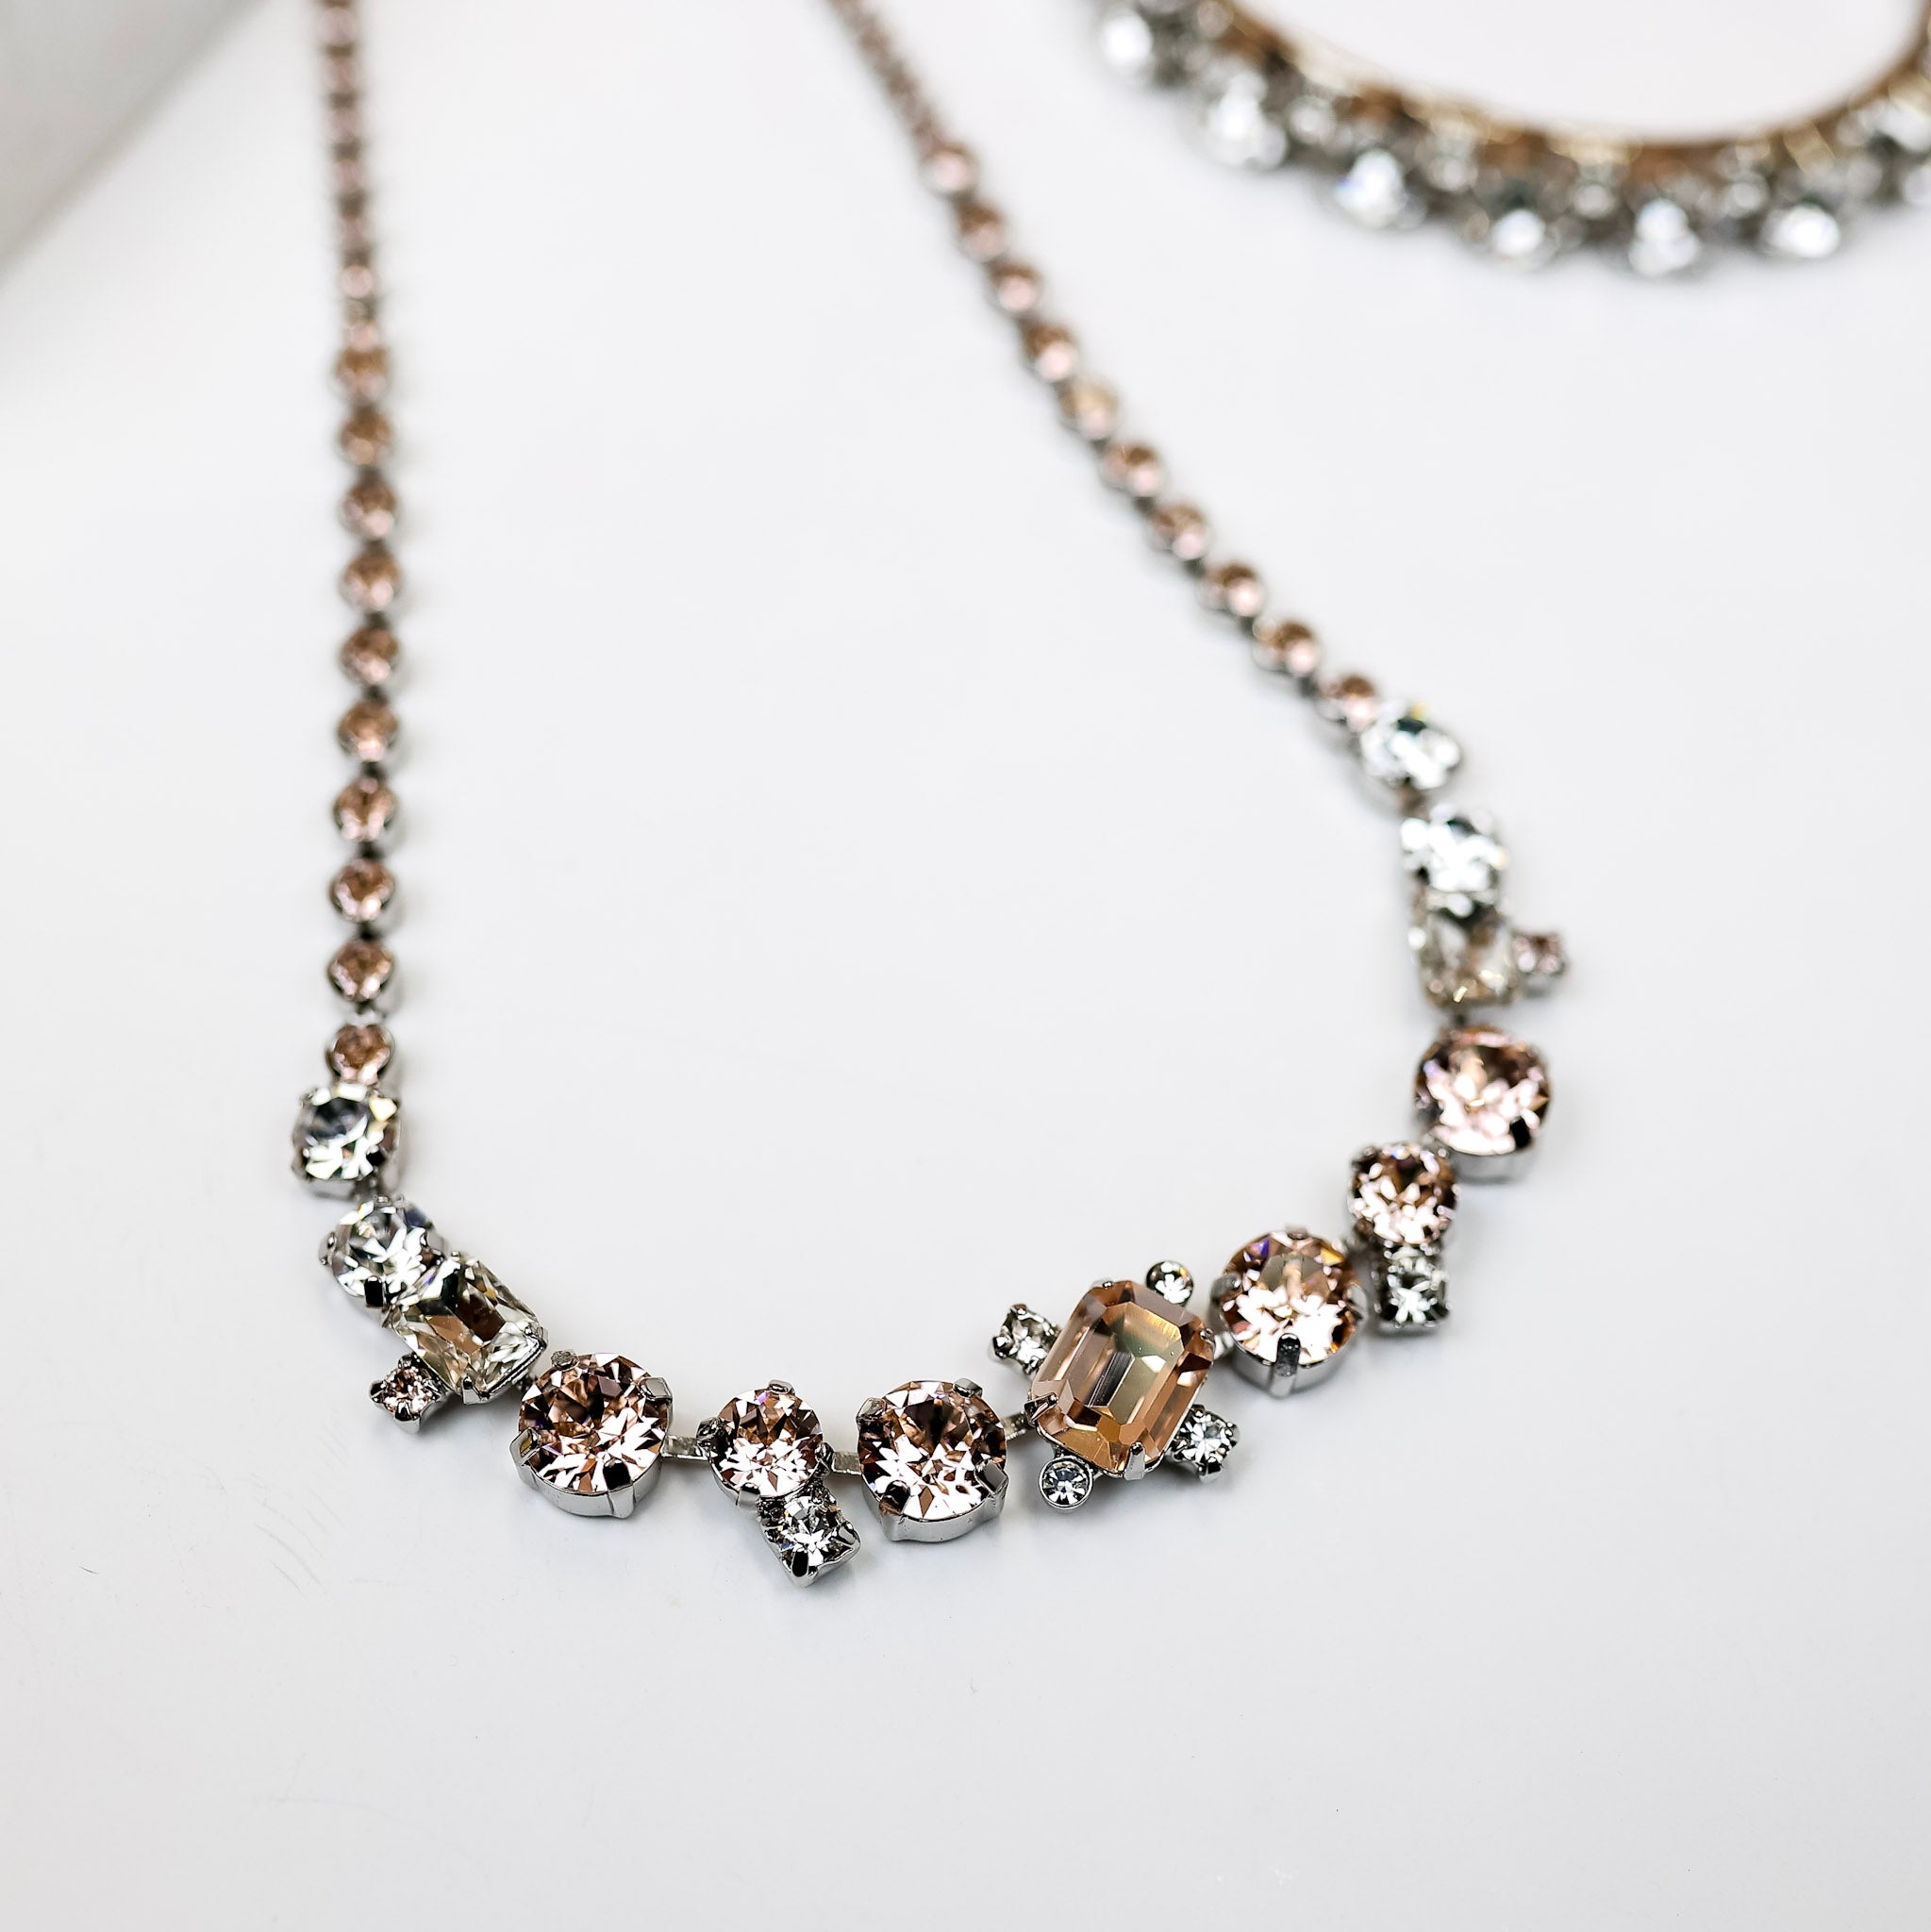 A necklace with blush and clear crystals along the entire chain with larger at the center.